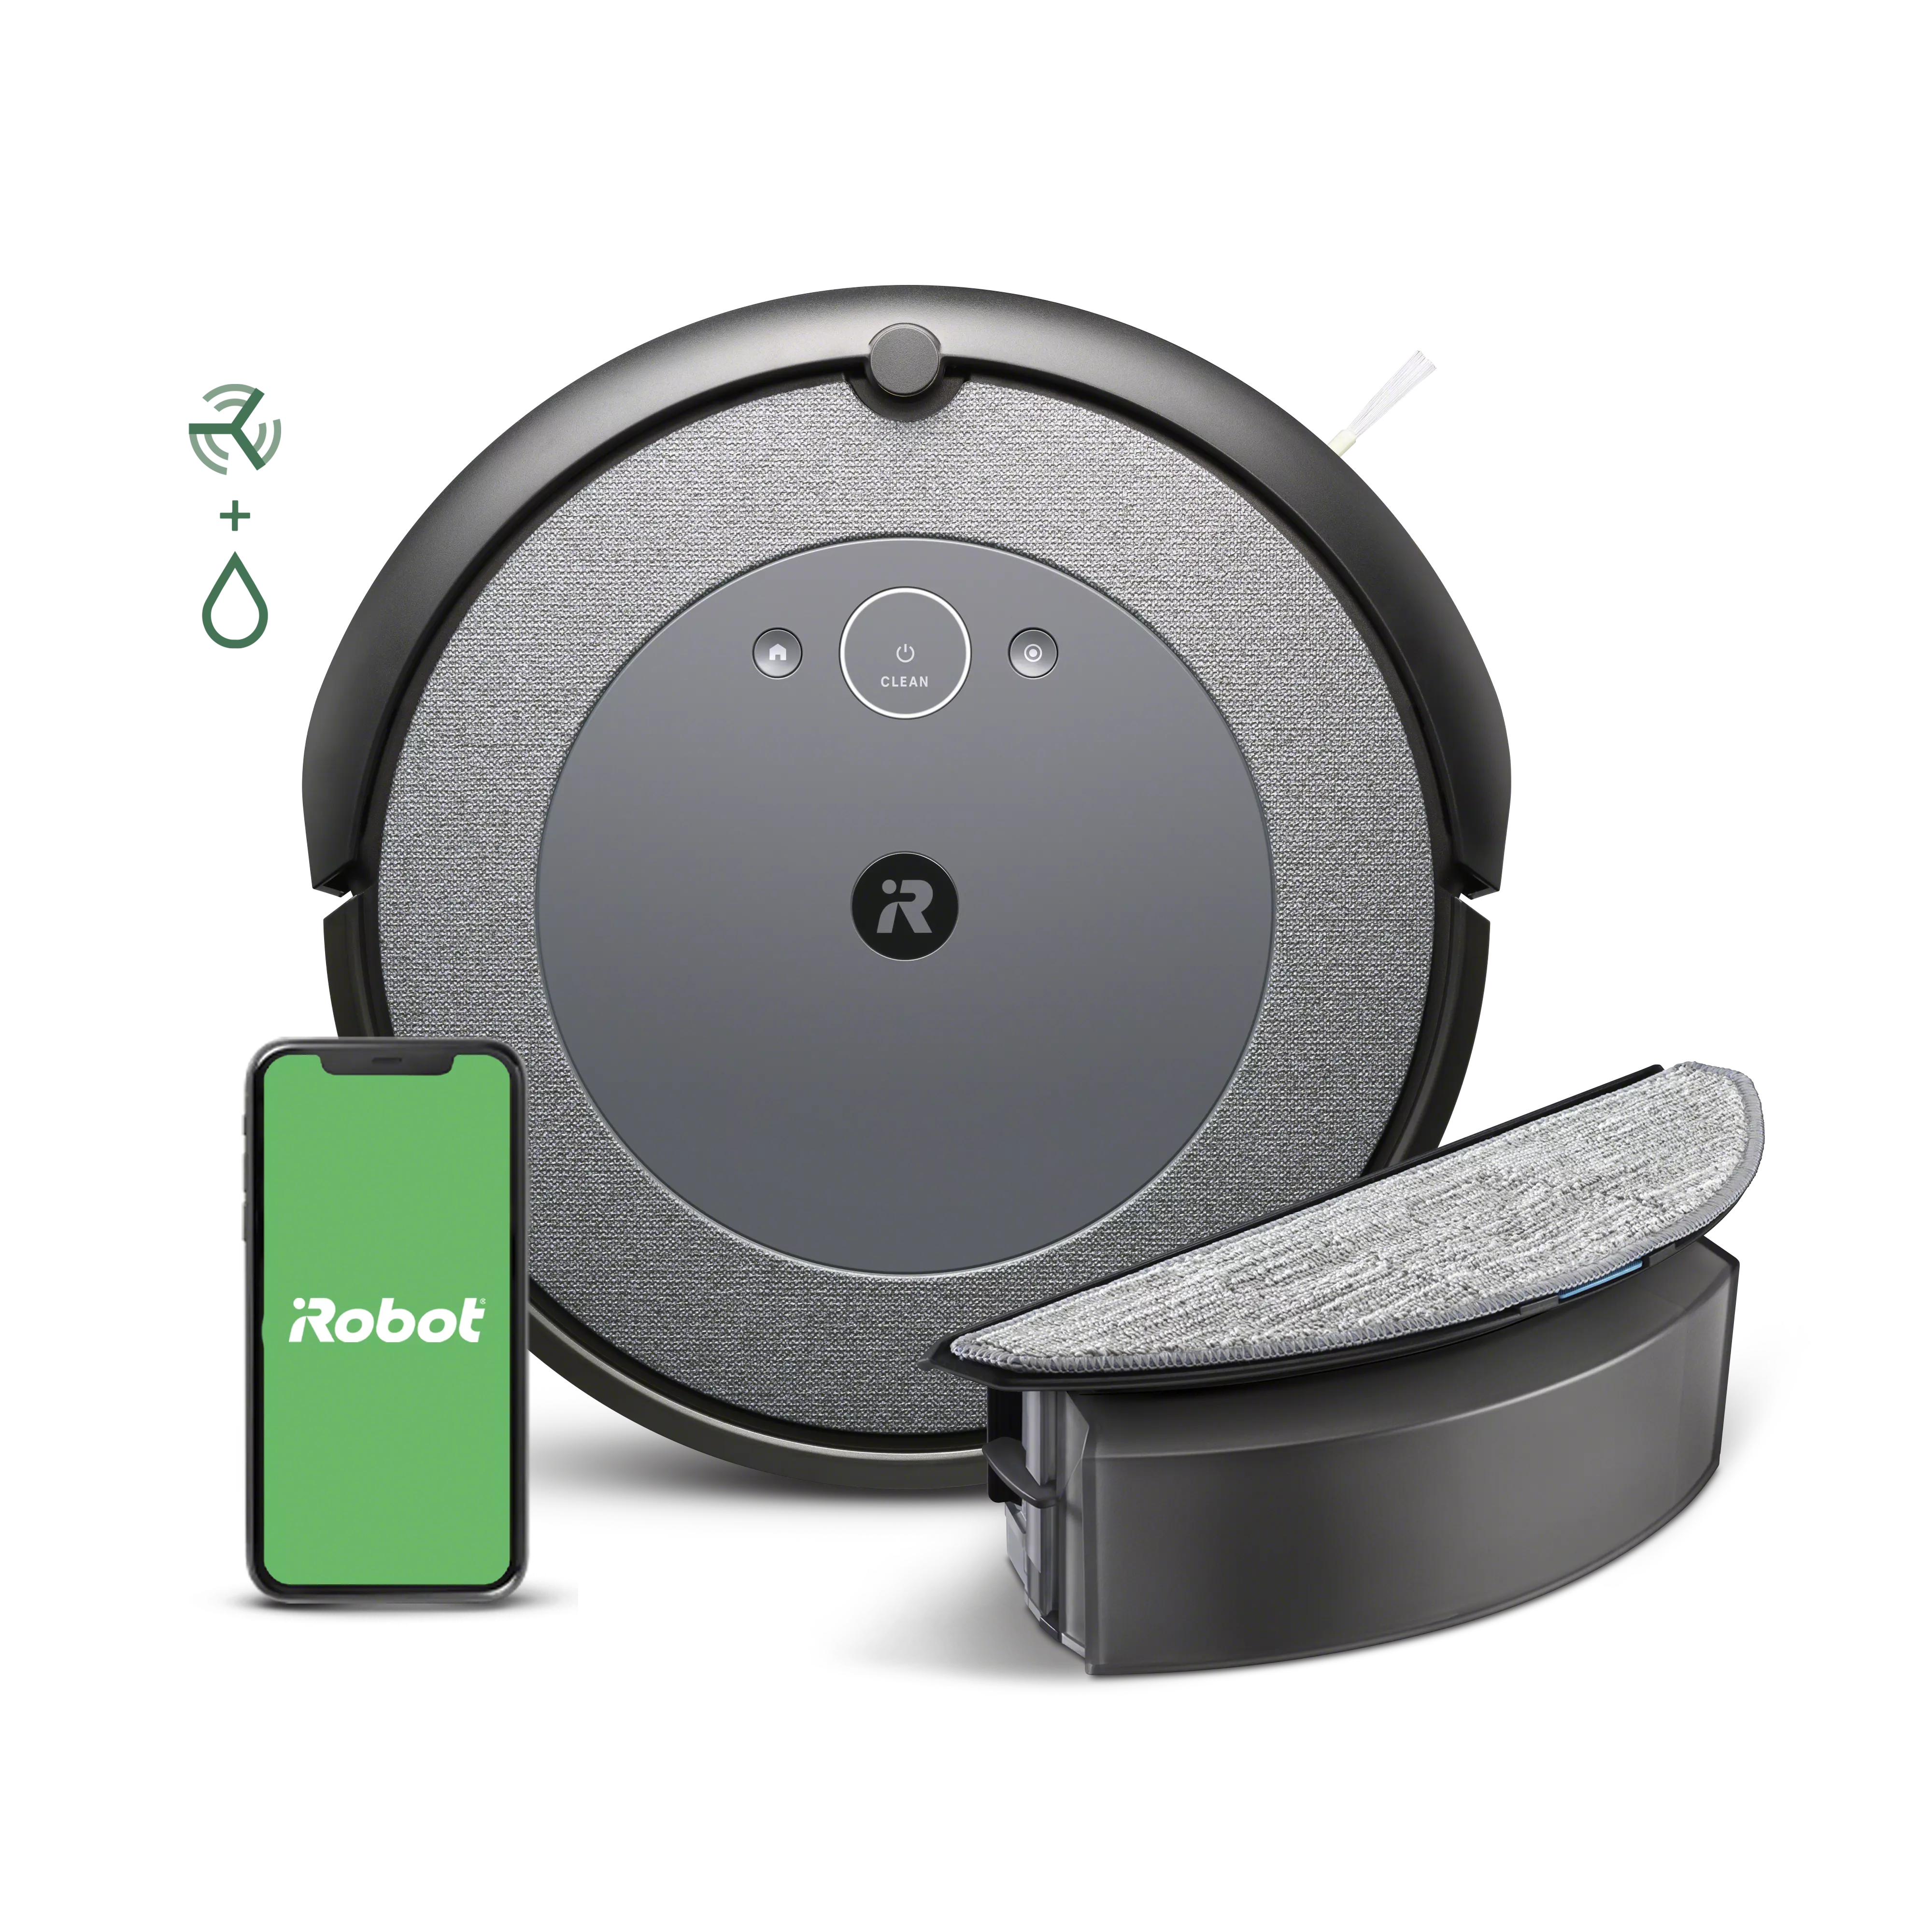 Roomba Combo™ i5+: The All-in-One Robot Vacuum Cleaner